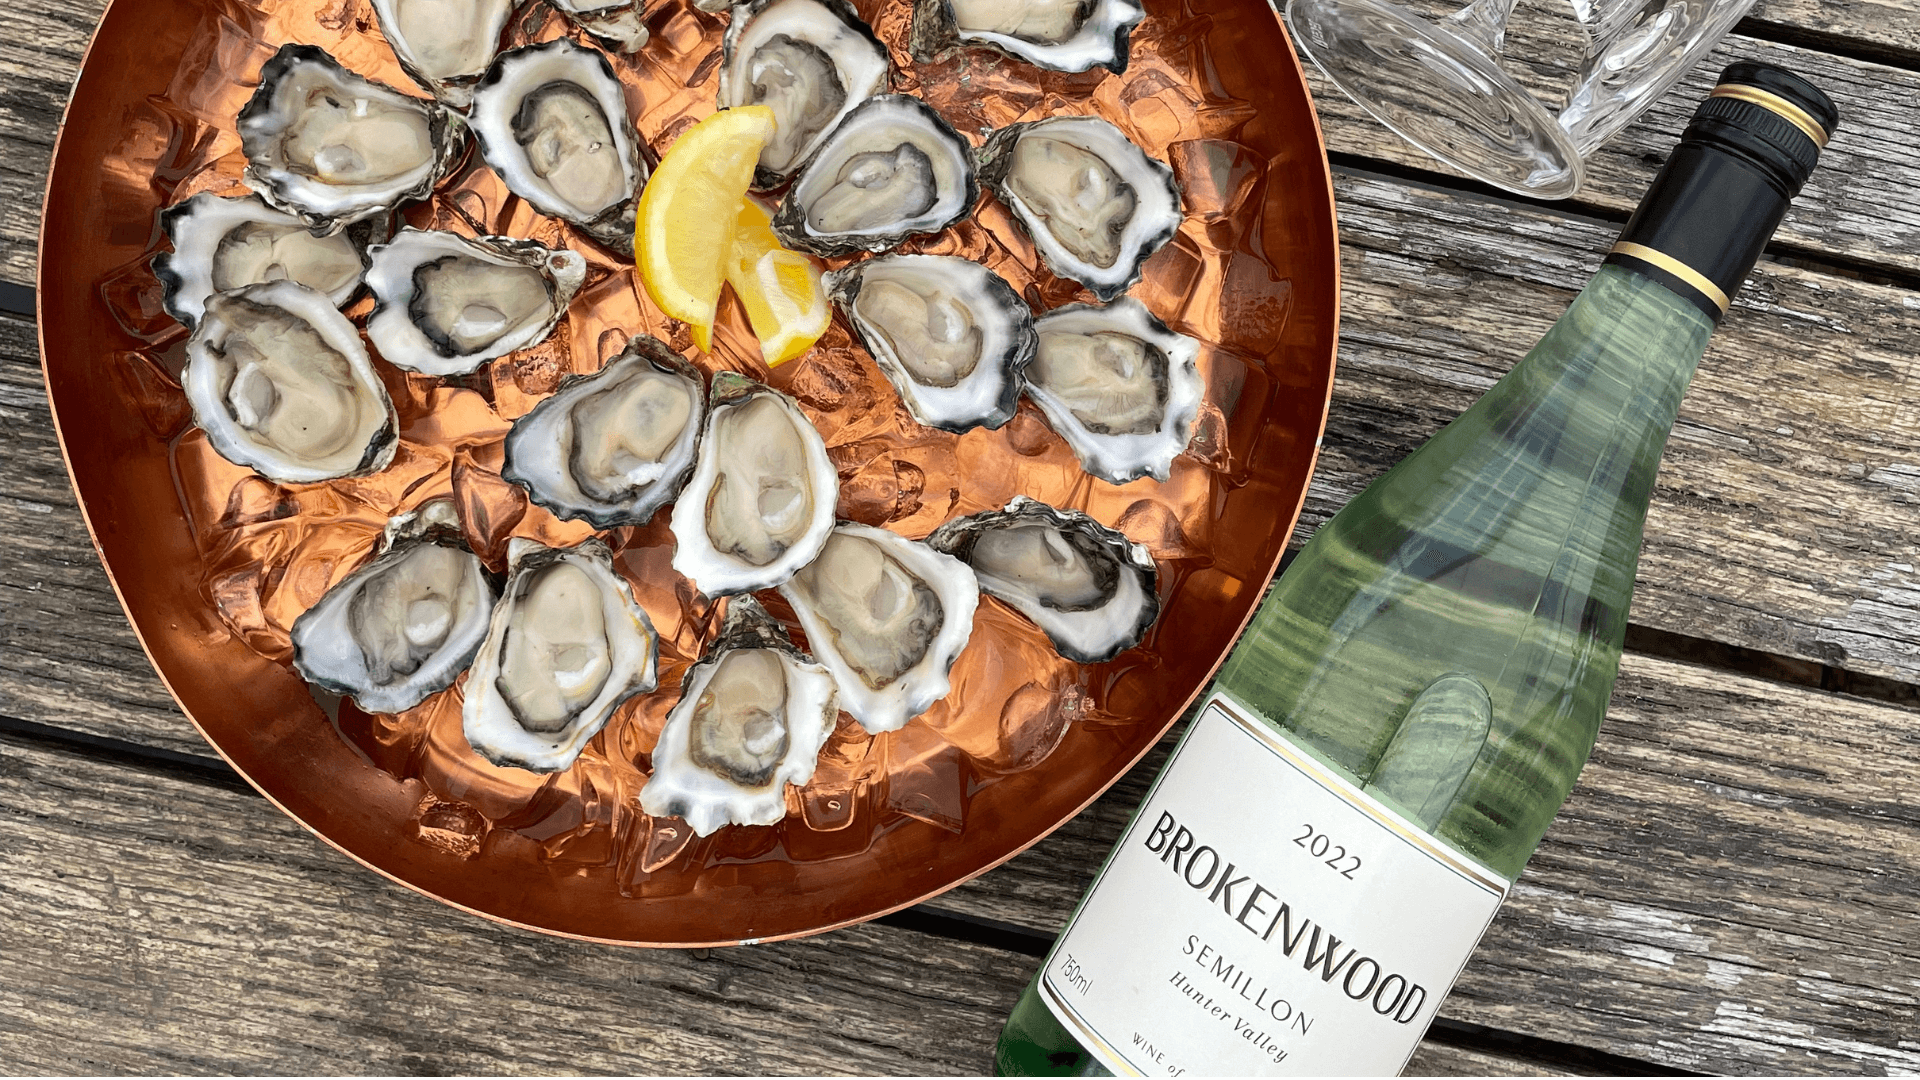 oyster-platter-with-brokenwood-semillon